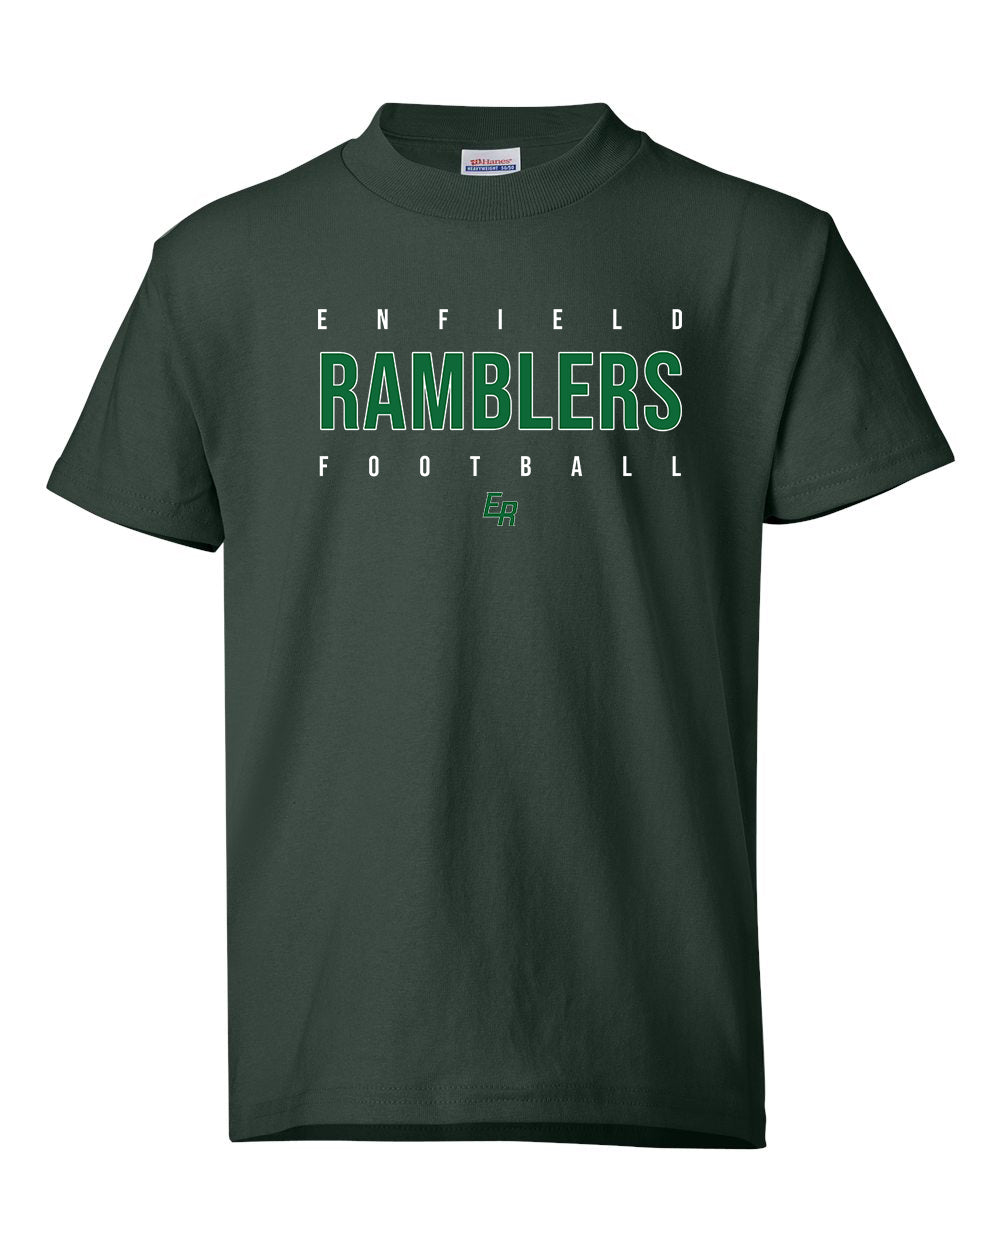 Ramblers Adult T-Shirt 50/50 - 29MR (color options available)